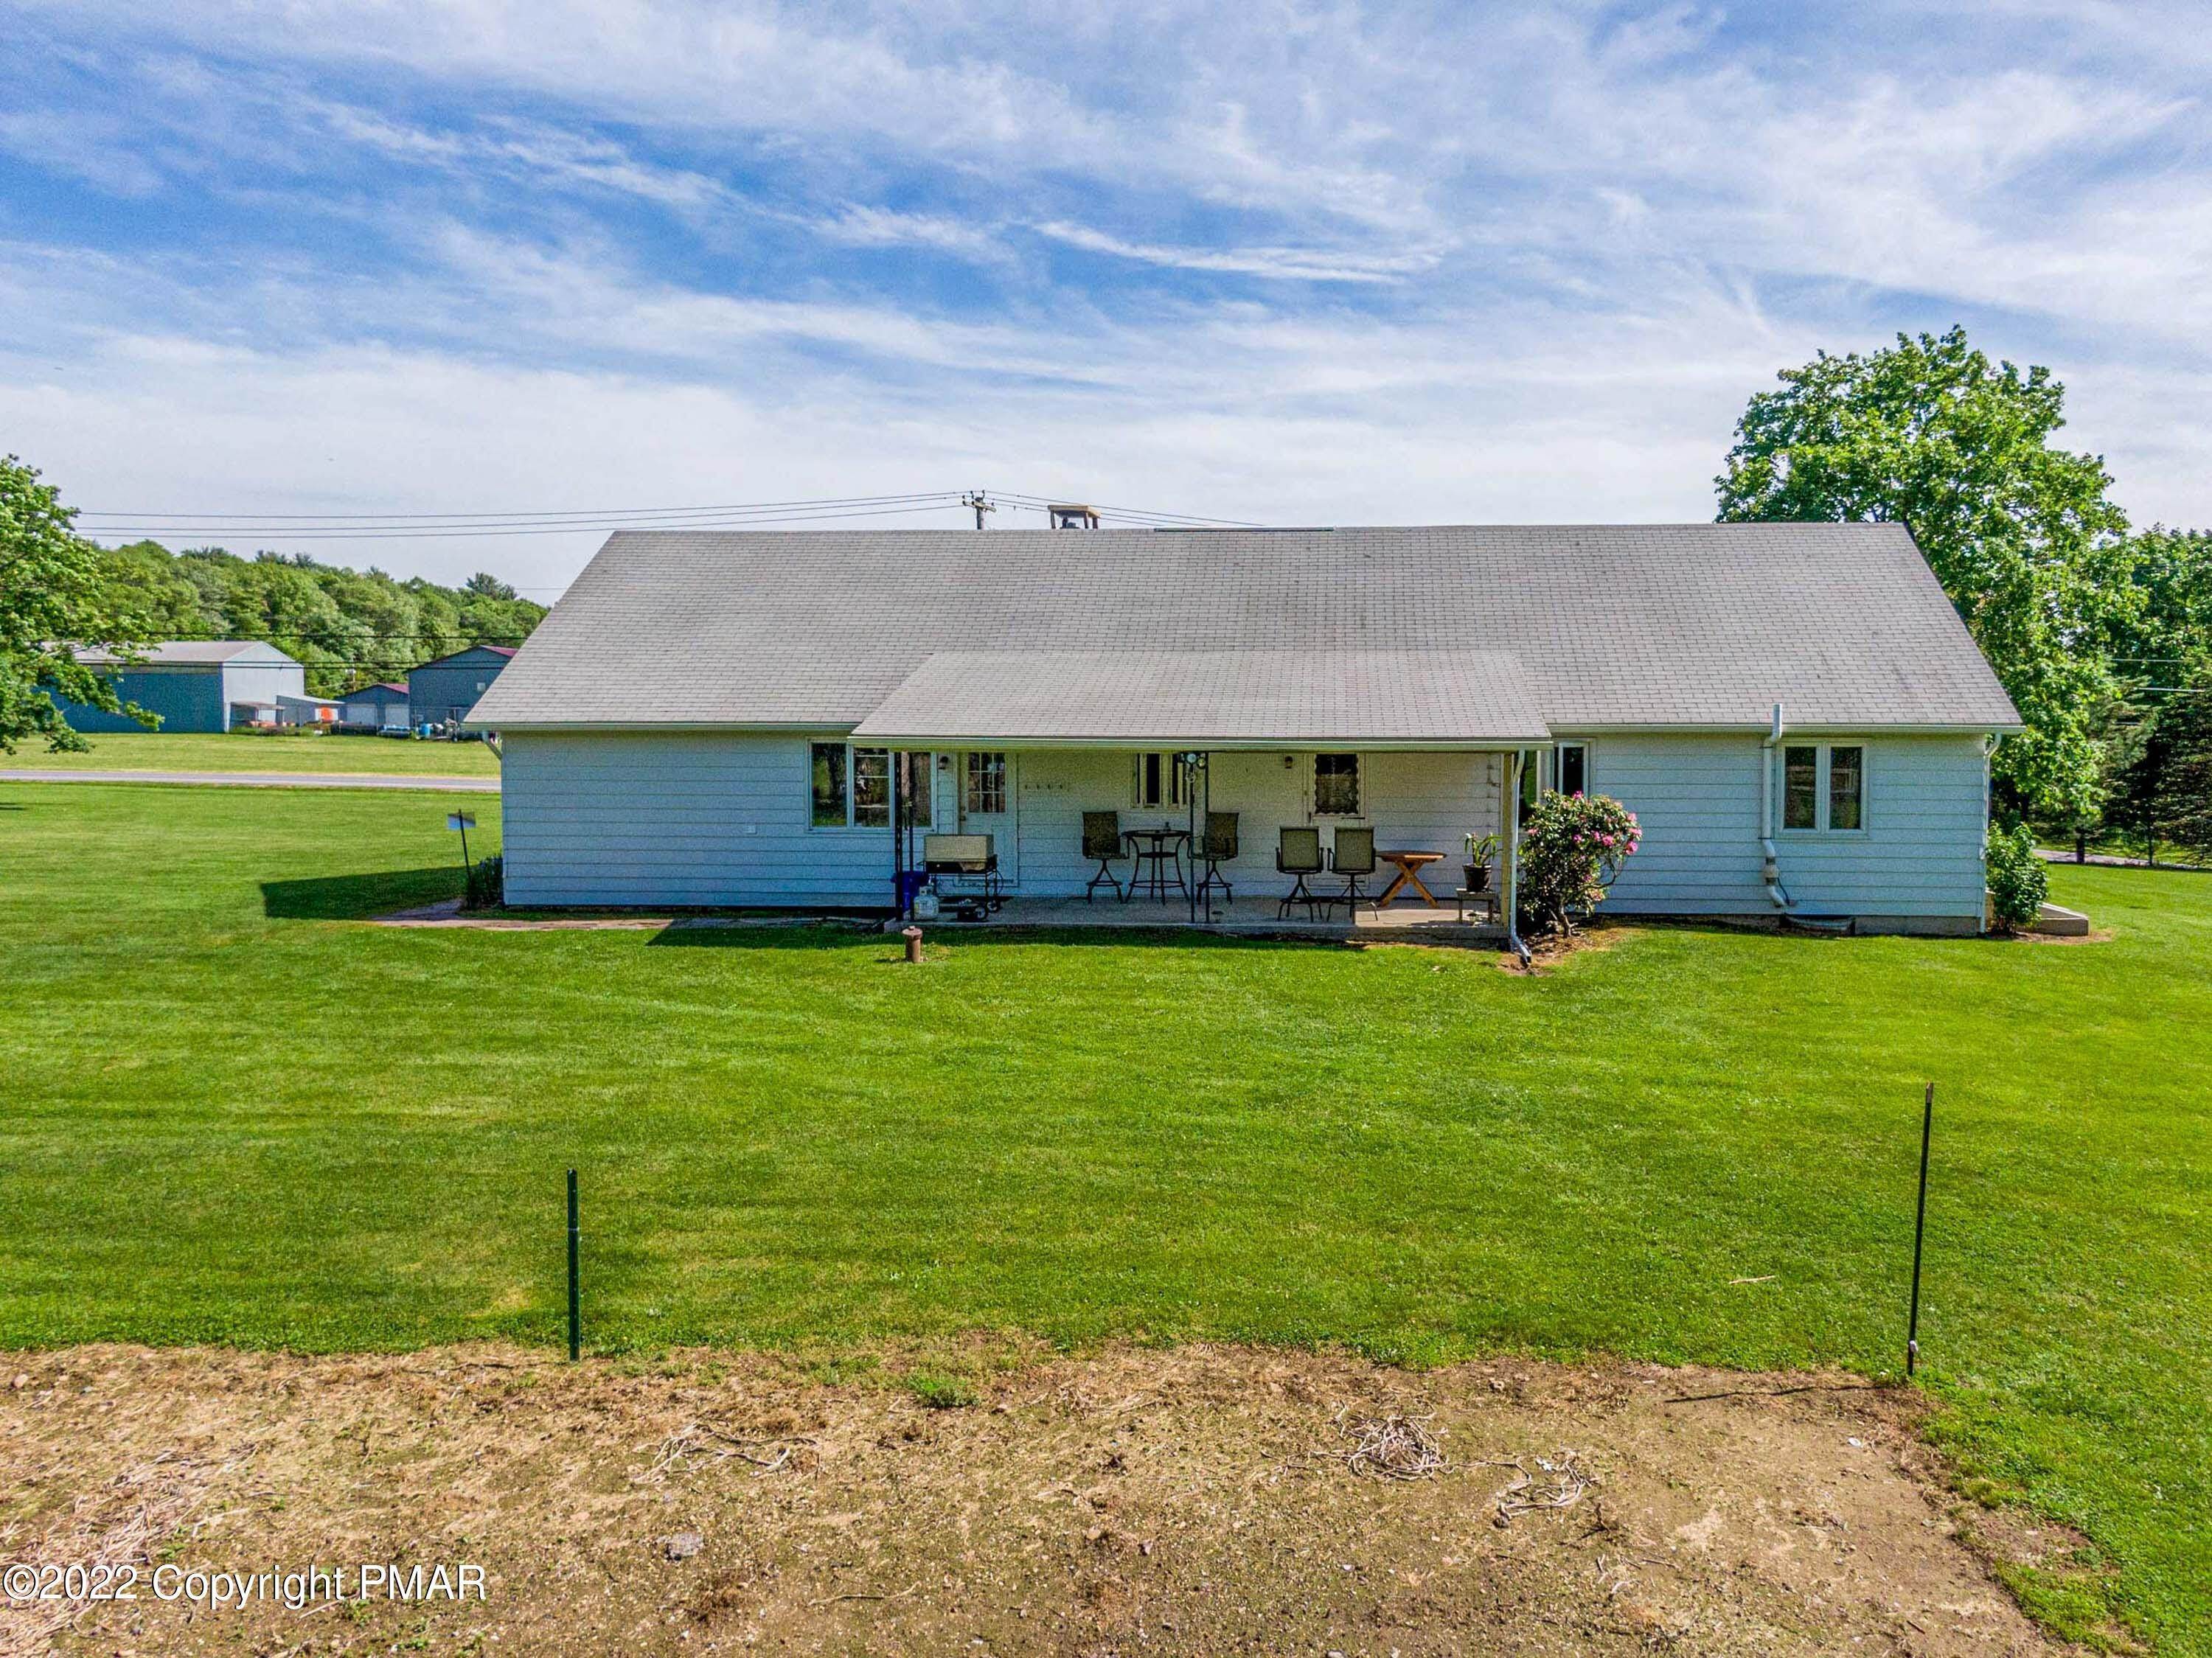 39. Farm and Ranch Properties for Sale at 1732 State Route 534 Albrightsville, Pennsylvania 18210 United States